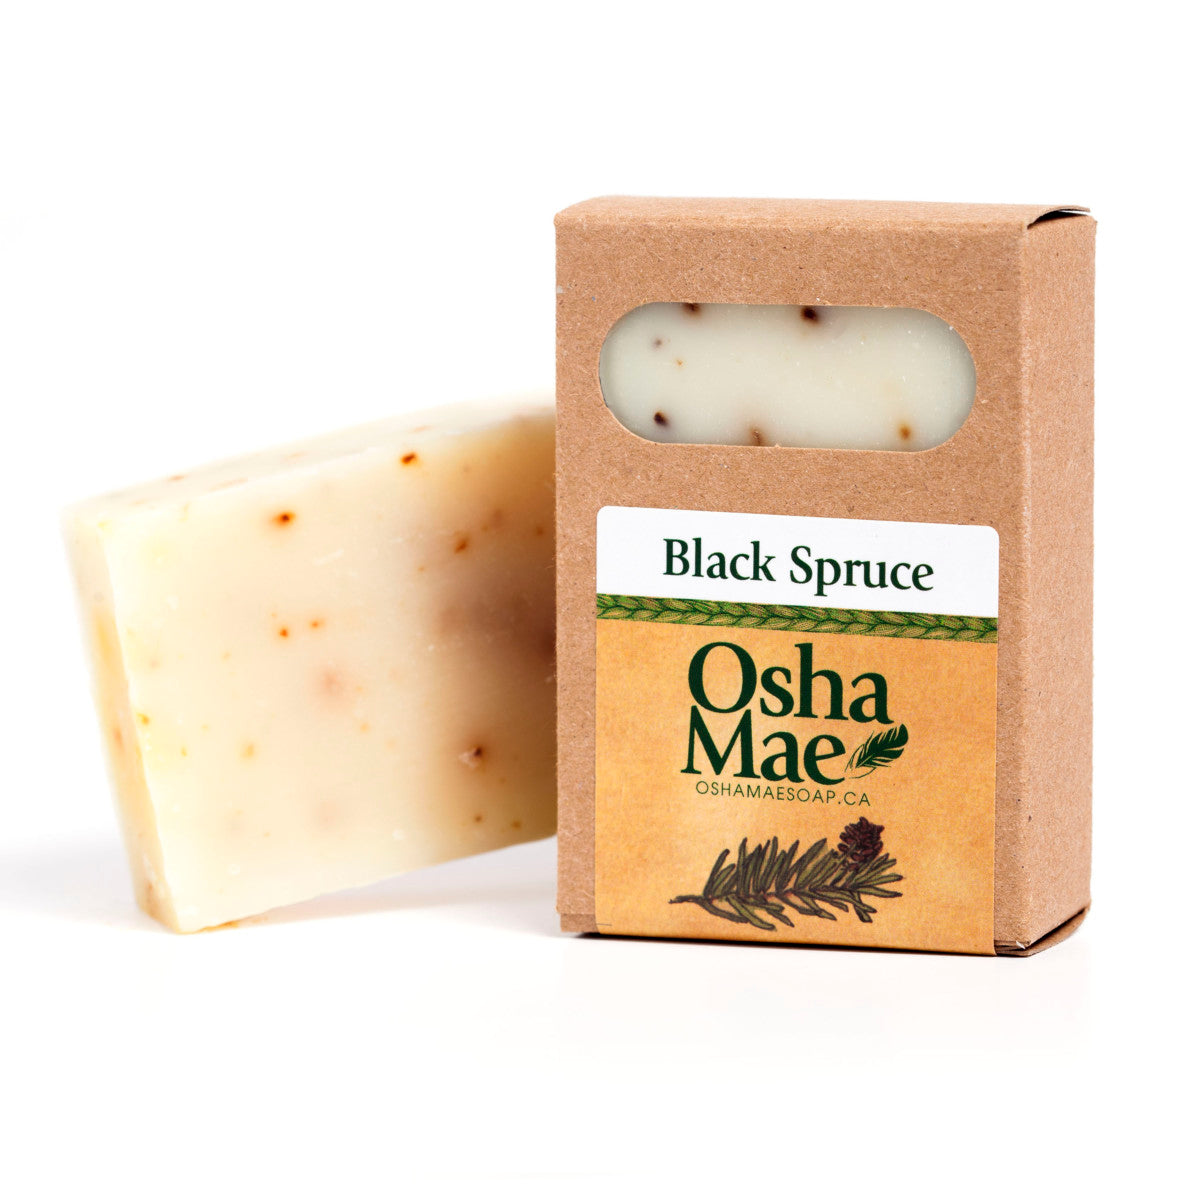 Canadian made natural soap with black spruce essential oils.